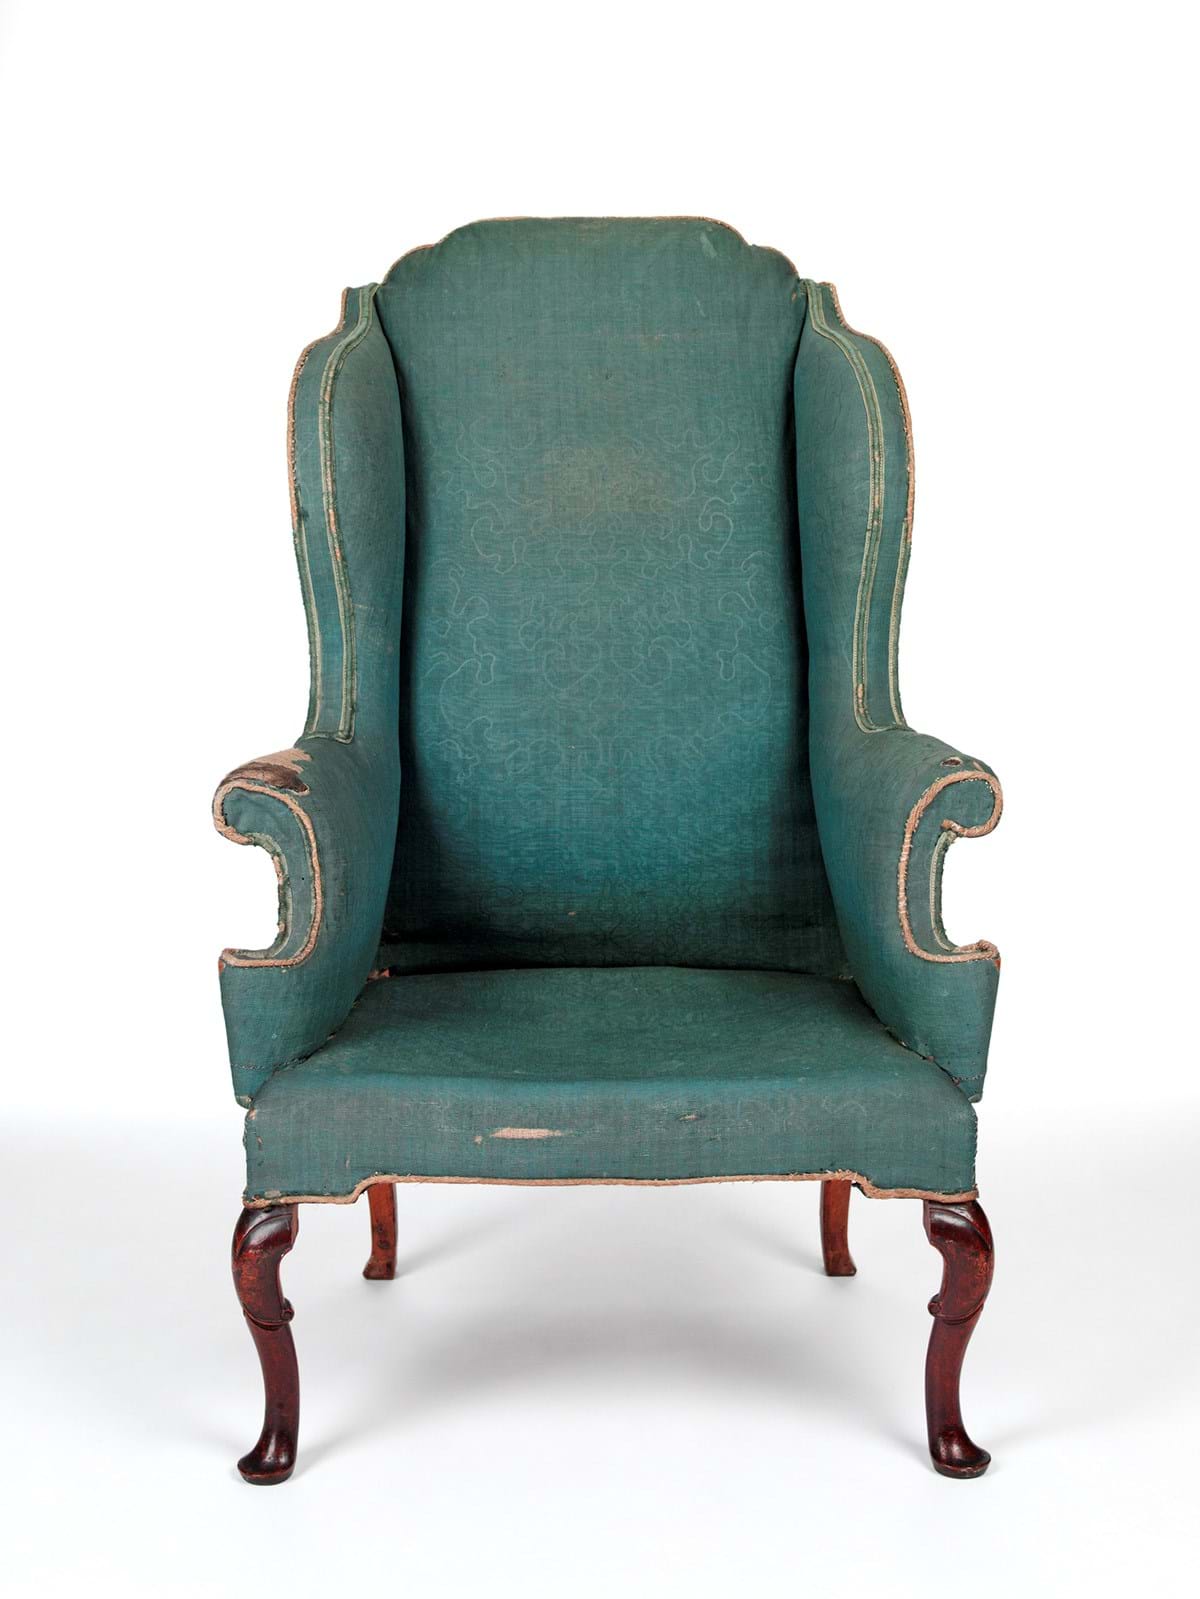 Blue chair with brown wooden legs